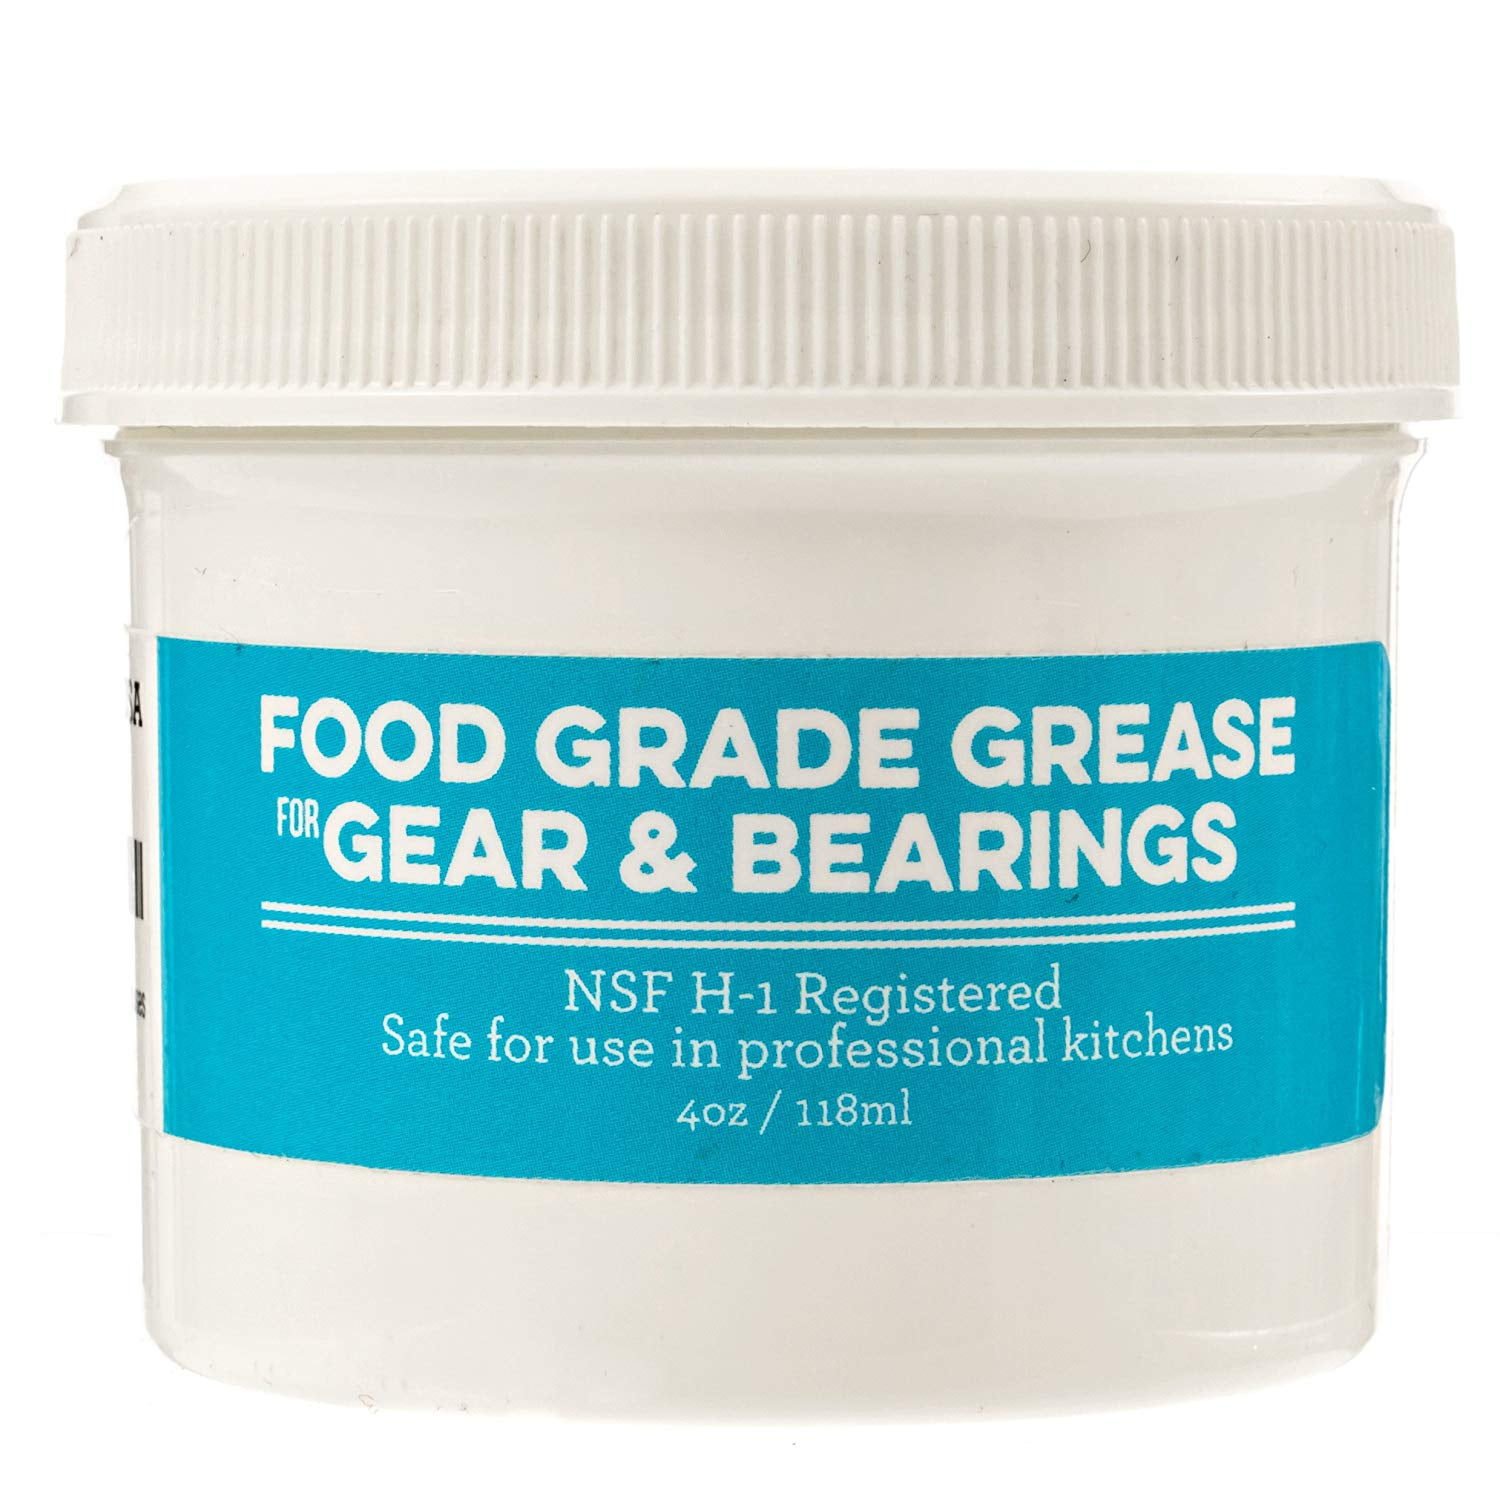 4 oz Food Grade Grease & Gasket by Ohoho - Compatible with Kitchen Stand Mixer